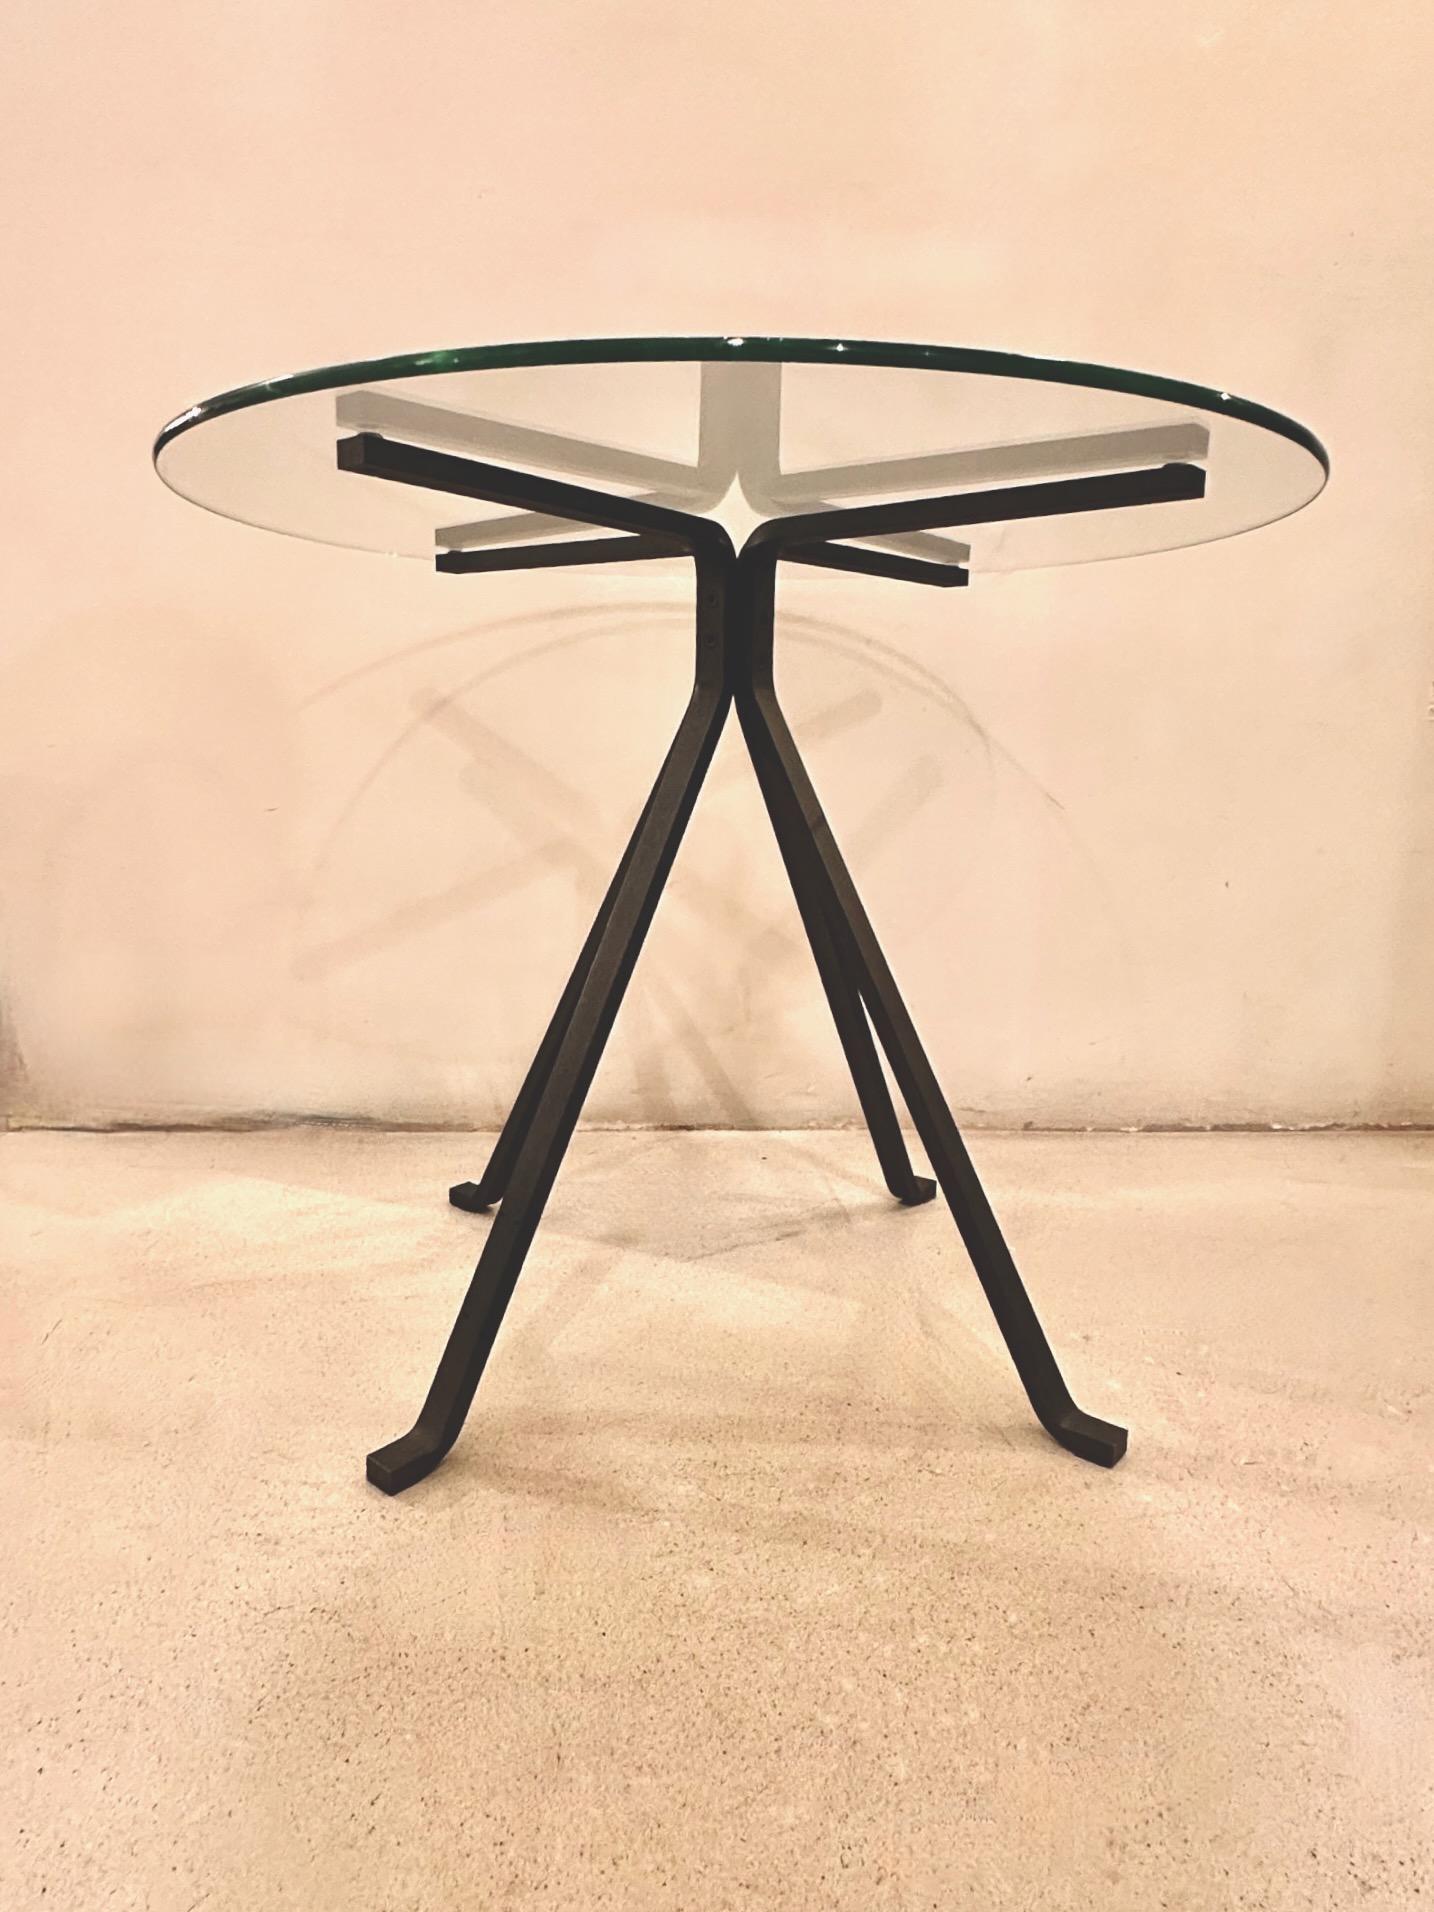 Italian Enzo Mari  Original Round and Glass Coffee Table for Driade .Italy.  1970 For Sale